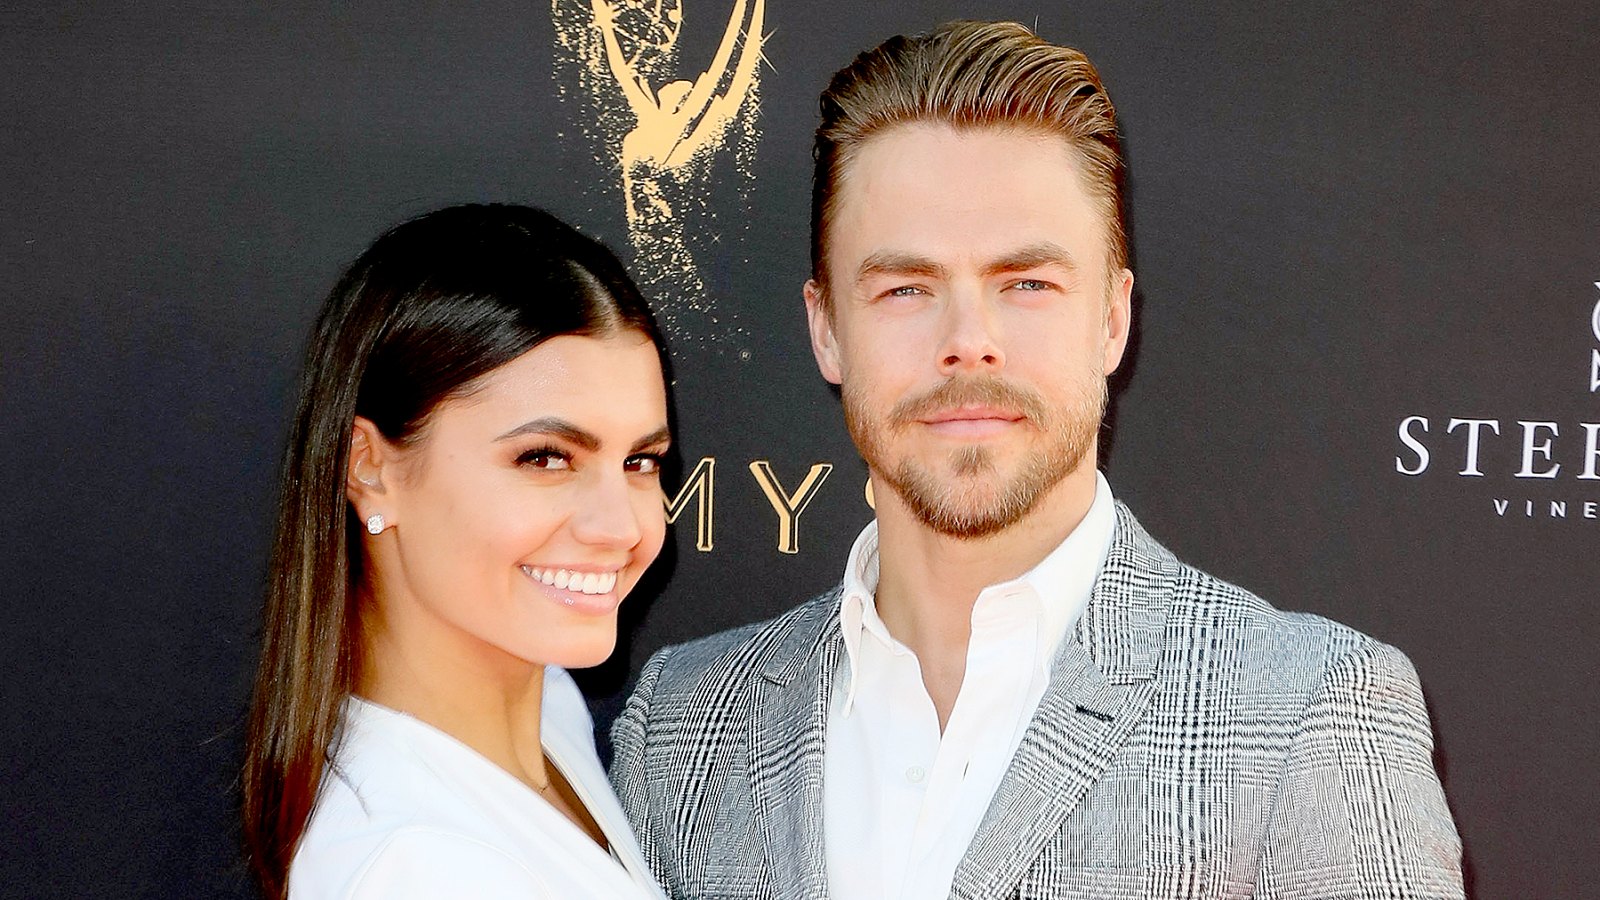 Hayley Erbert and Derek Hough attend the Television Academy's Choreography Peer Group Celebration at Saban Media Center on August 27, 2017 in North Hollywood, California.